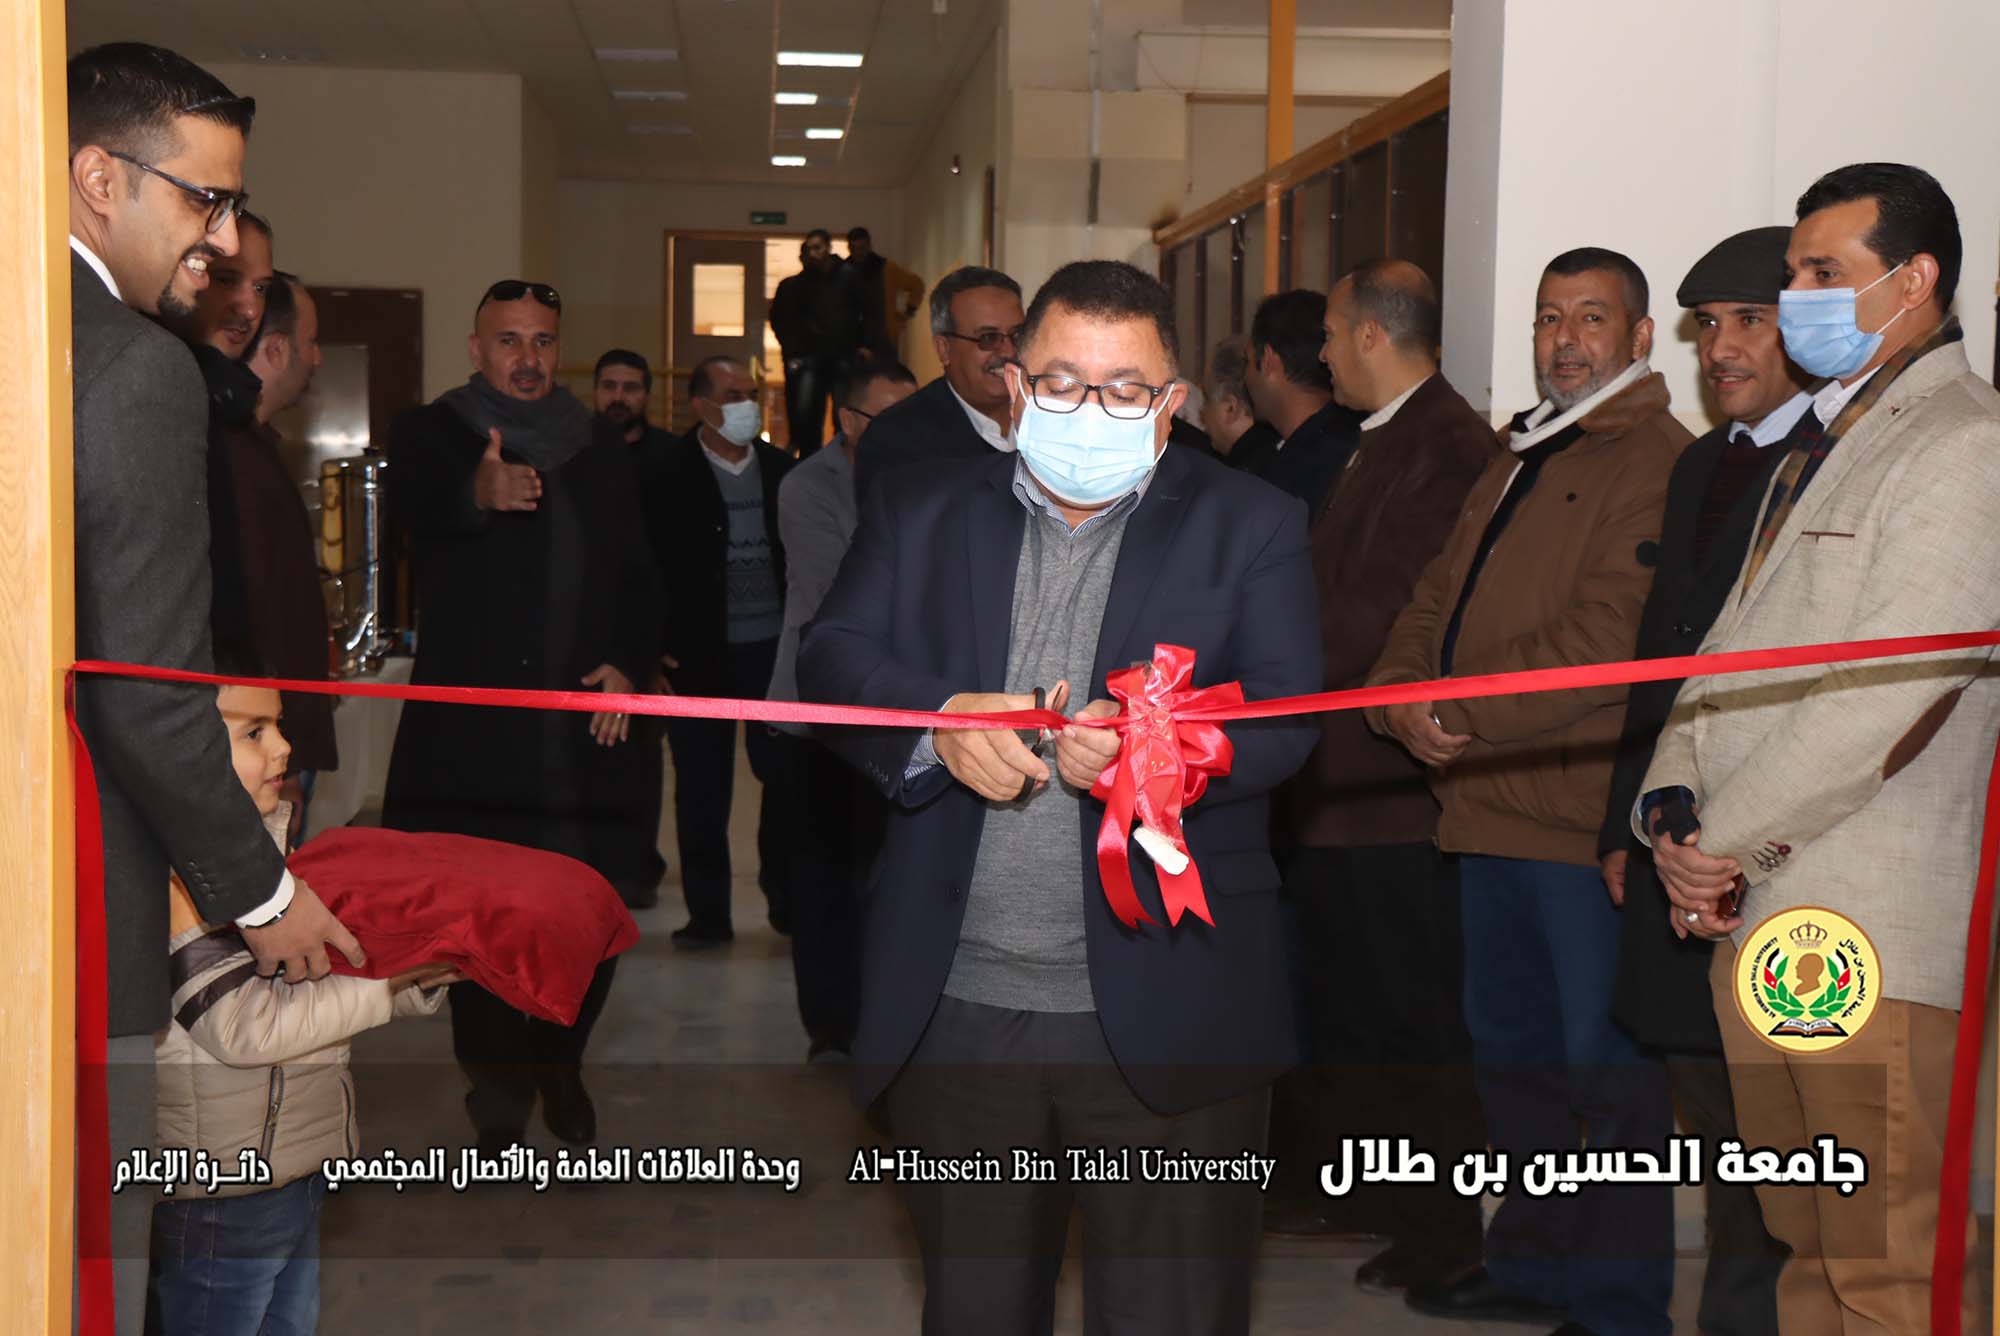 Opening of the Internet of Things Lab at Al Hussein Bin Talal University